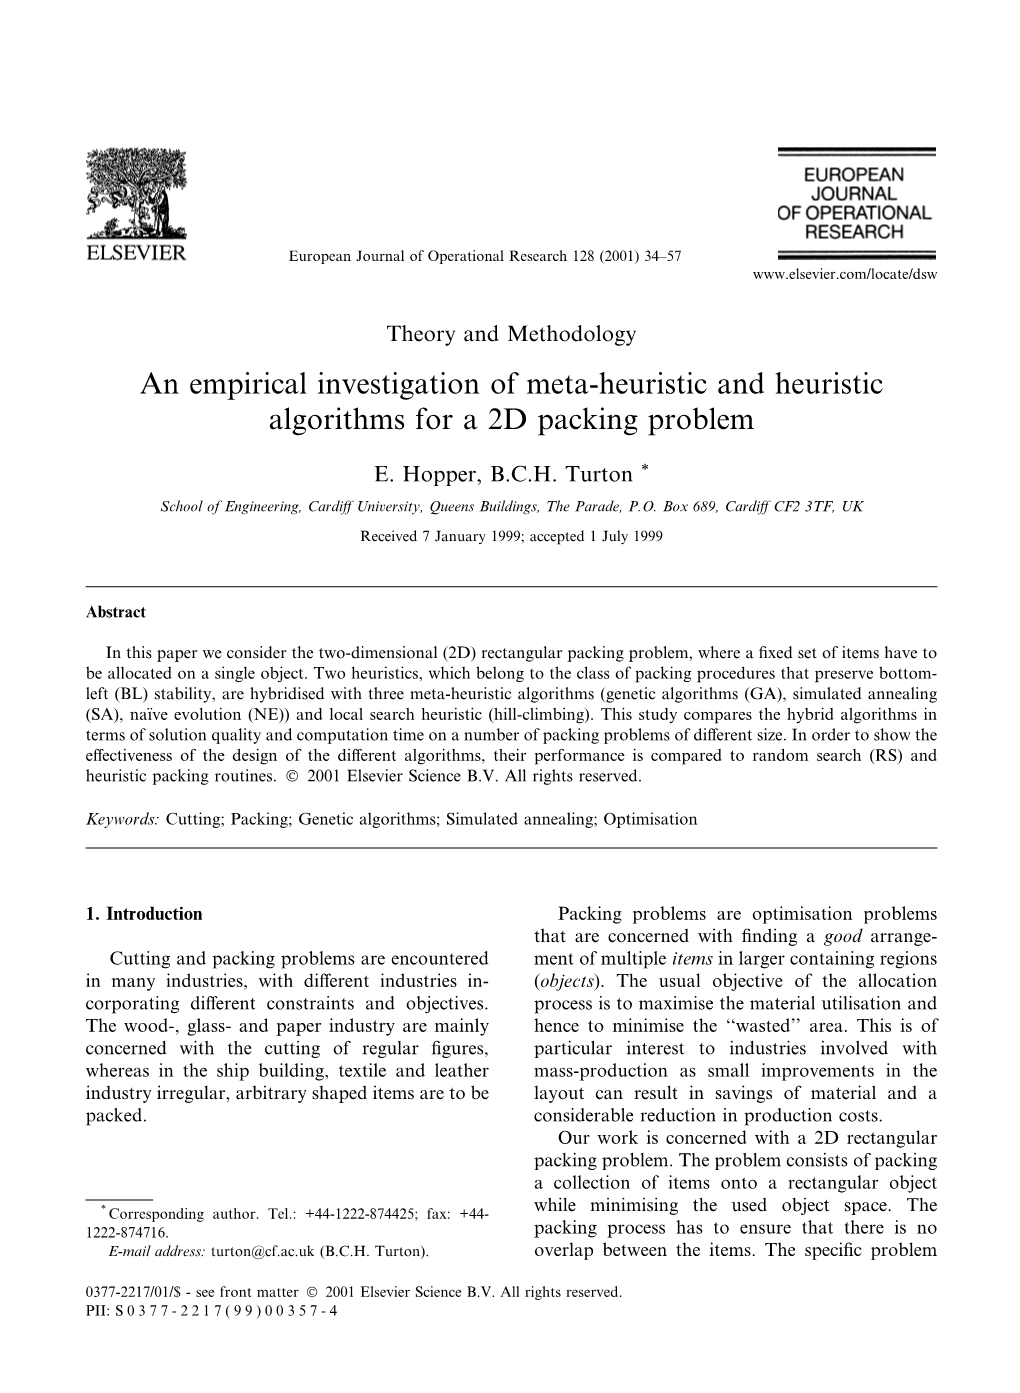 An Empirical Investigation of Meta-Heuristic and Heuristic Algorithms for a 2D Packing Problem